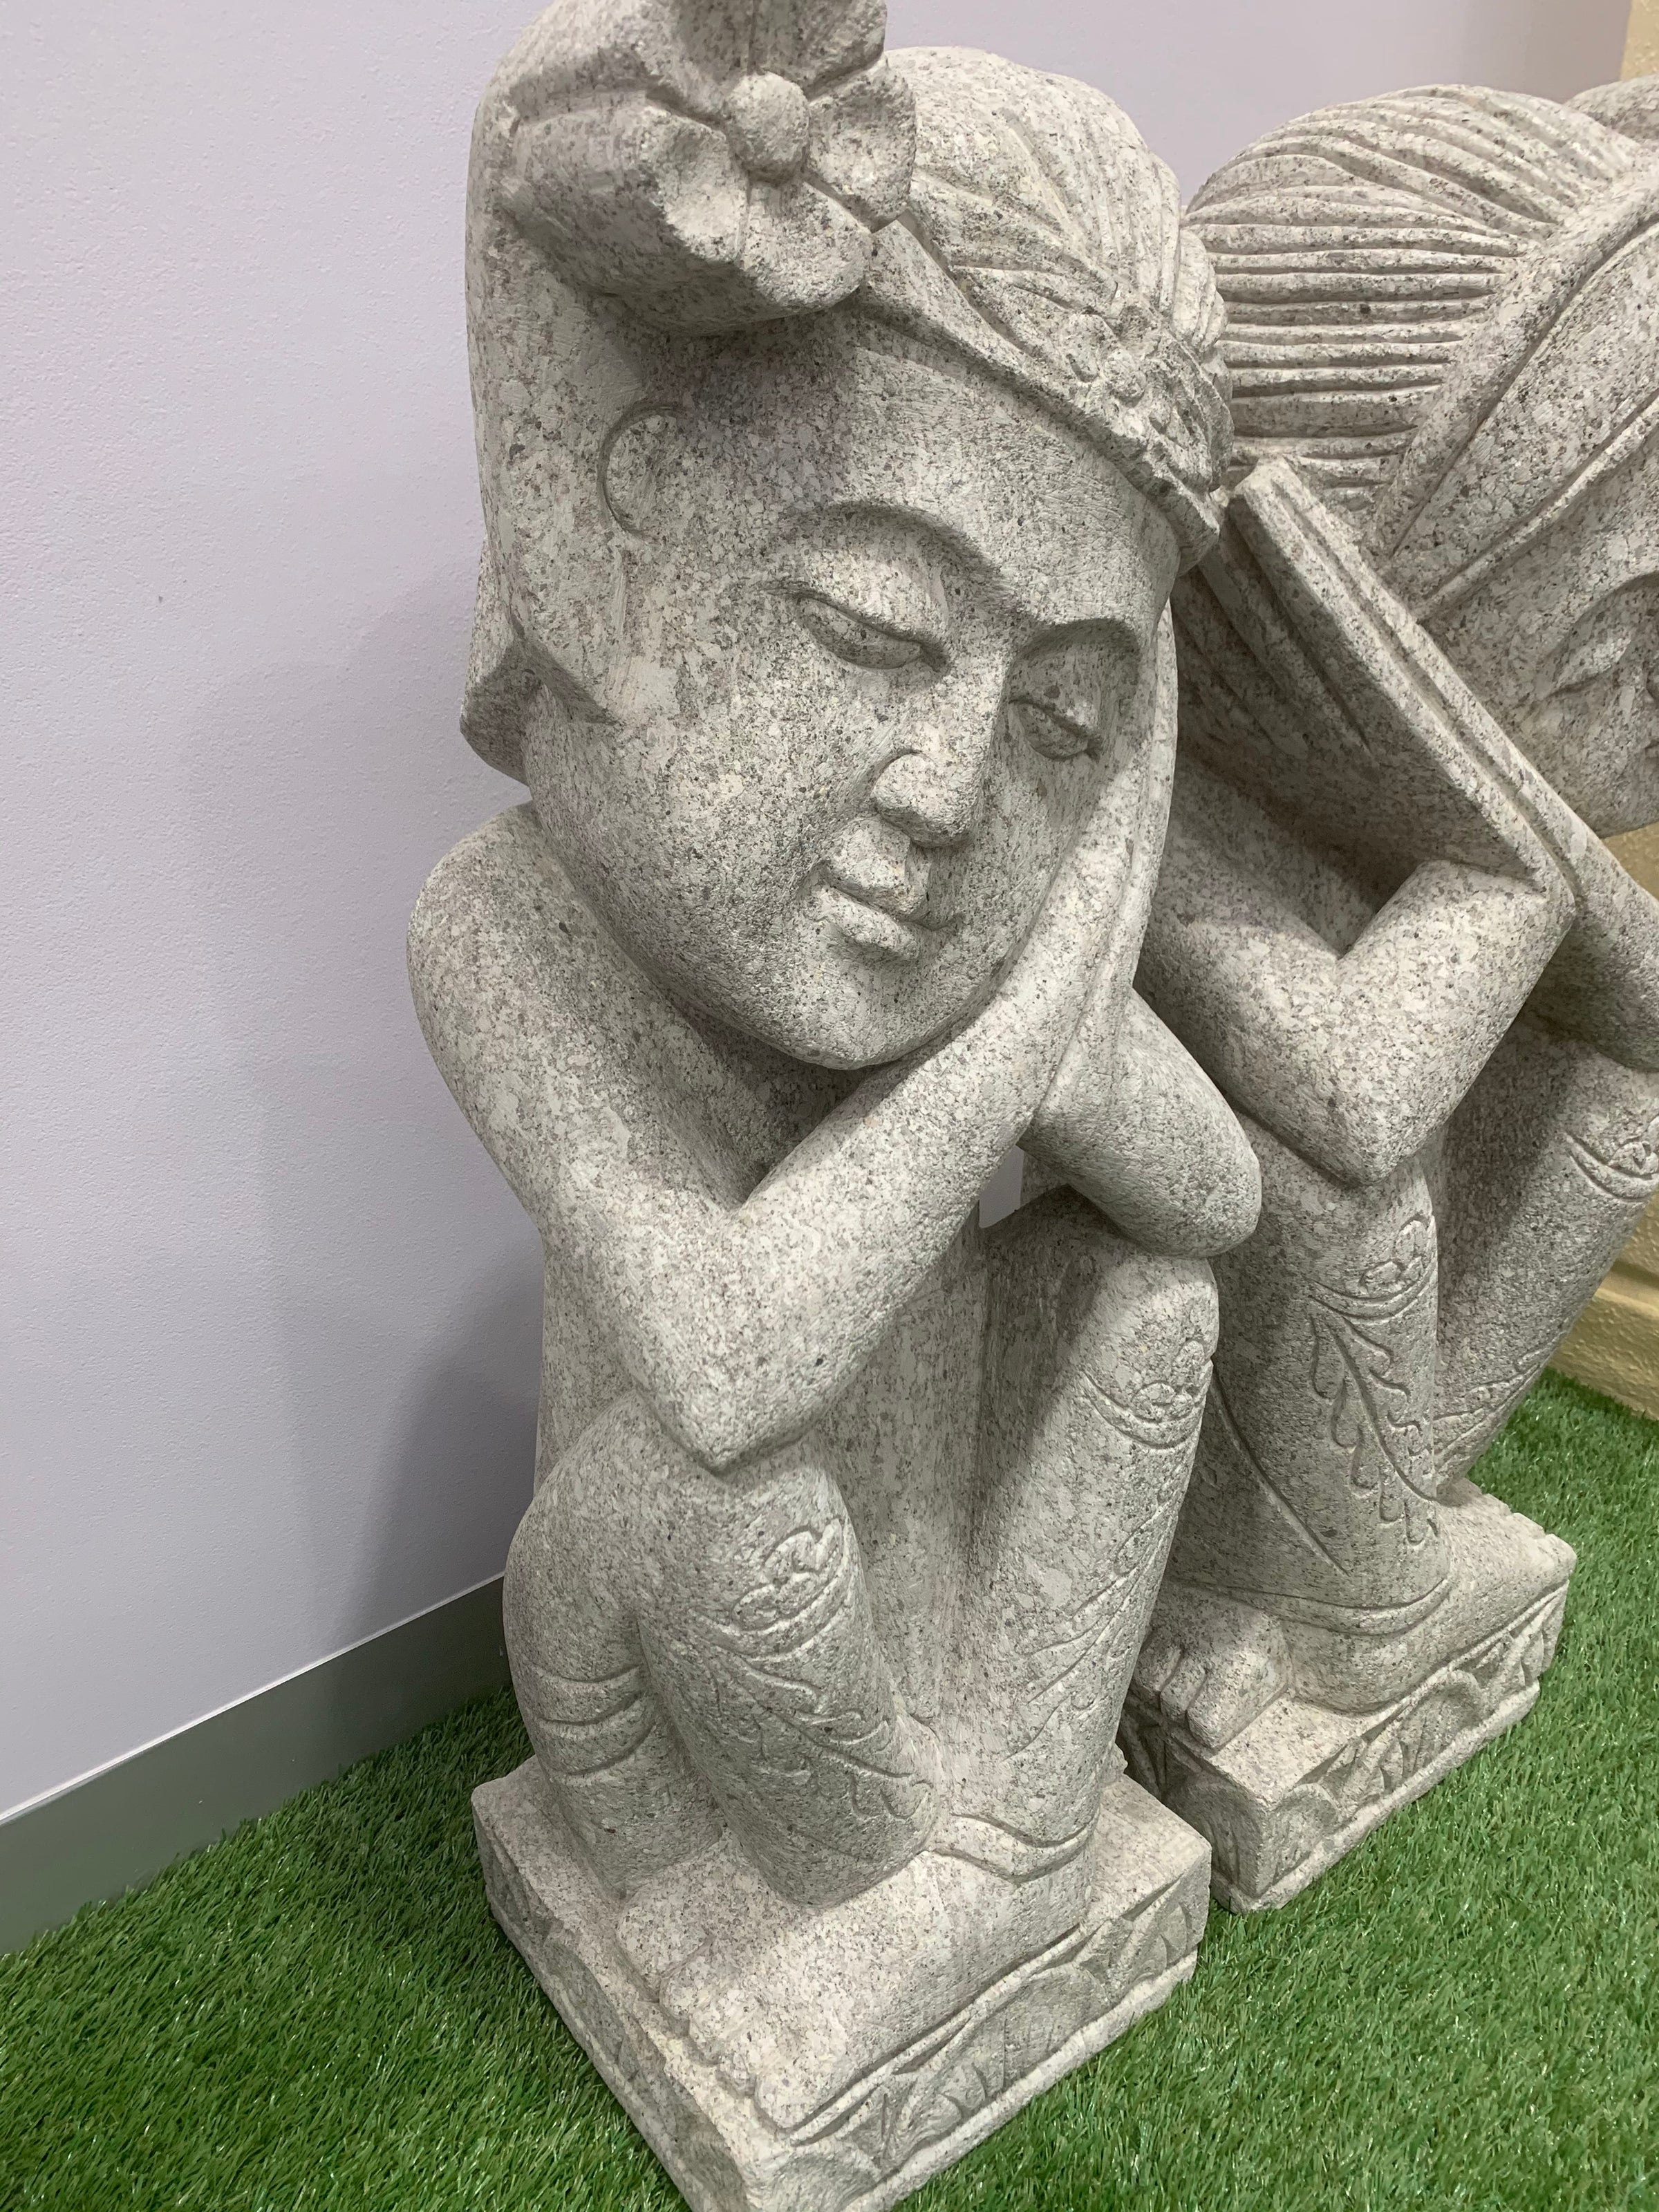 Balinese Brexi Stone Dreaming Couple Garden Statues